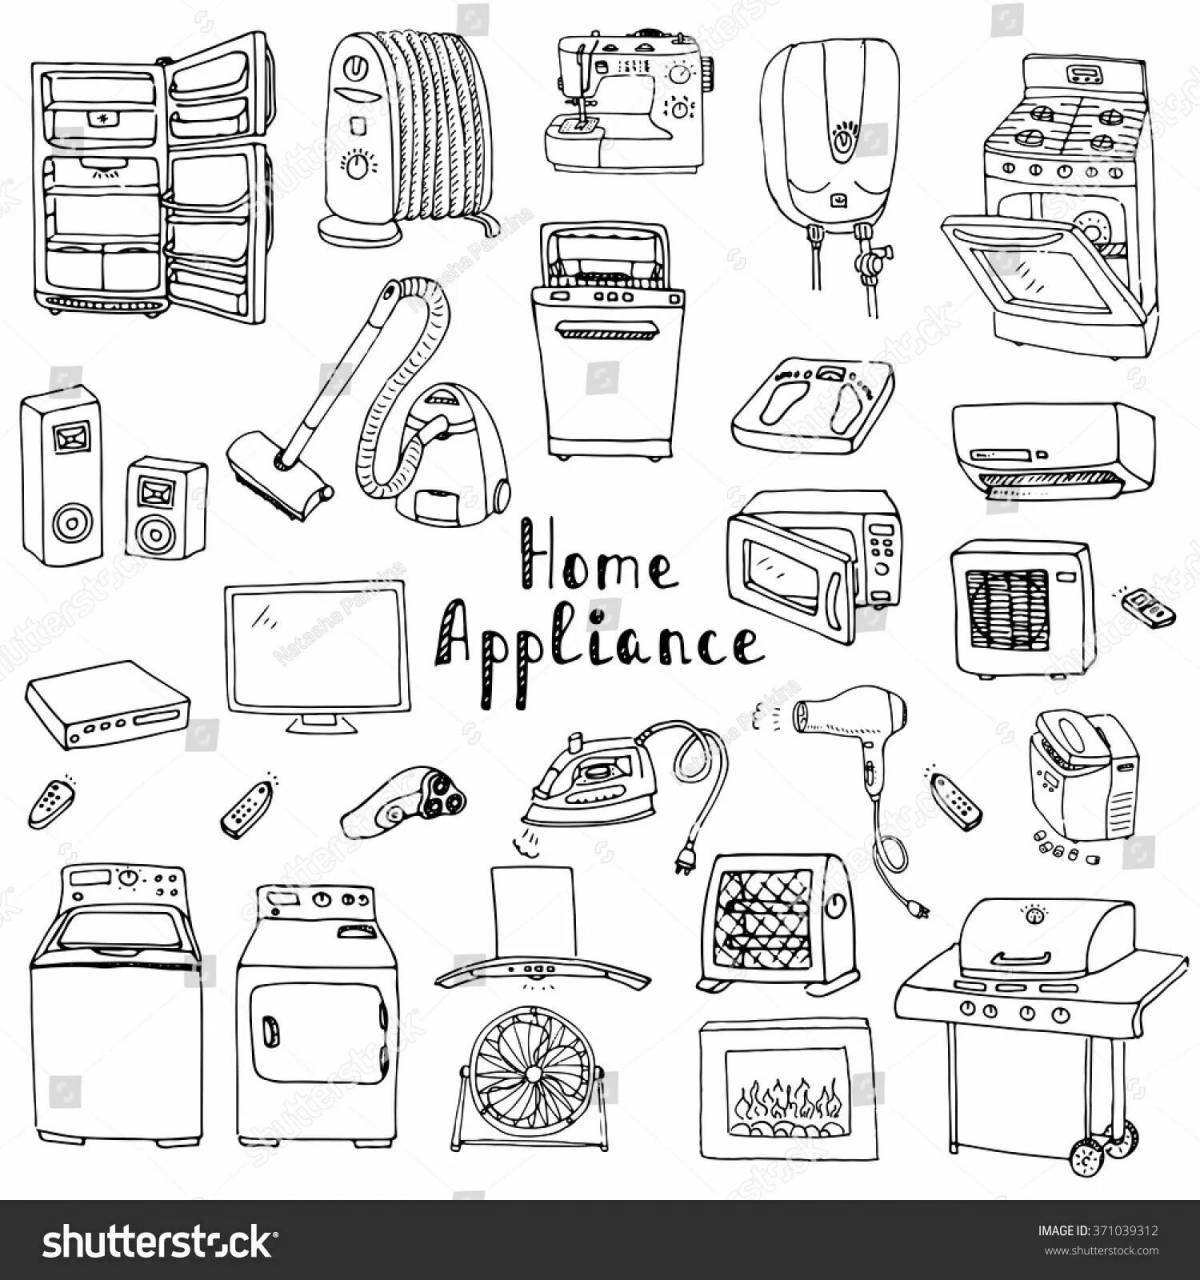 Coloring page of joyful electrical devices